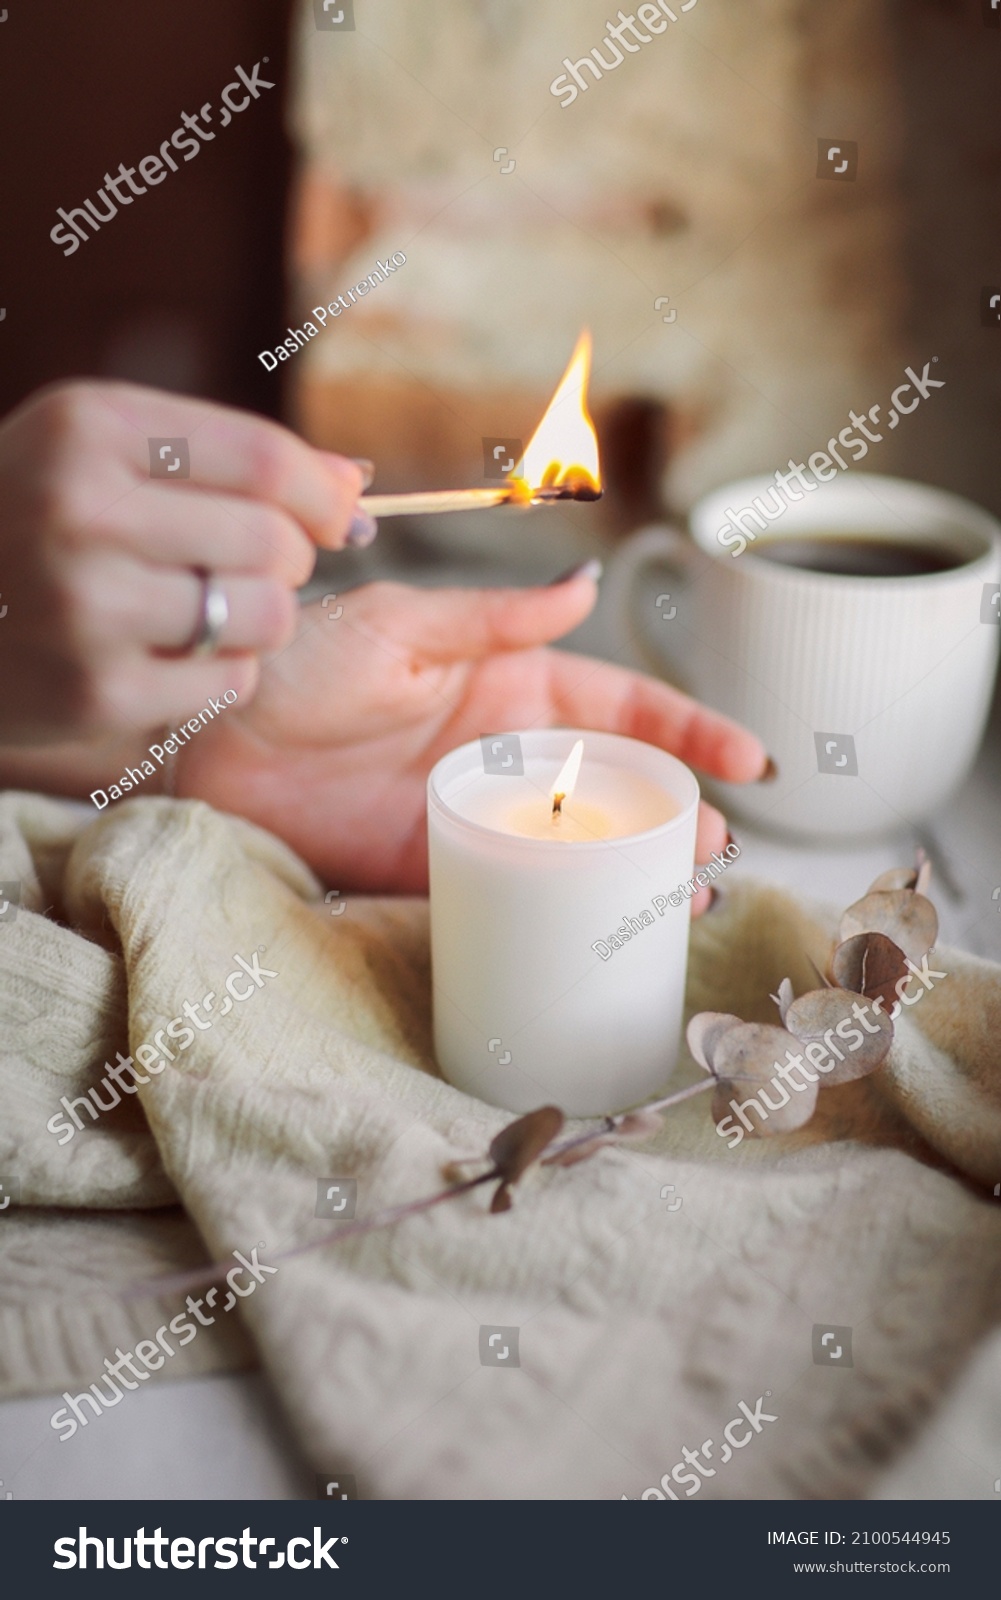 Female hands with lit match lighting burning candle on windowsill for calm and coziness at home, woman trying to create cozy warm and intimate atmosphere in cold season. Hygge lifestyle concept #2100544945